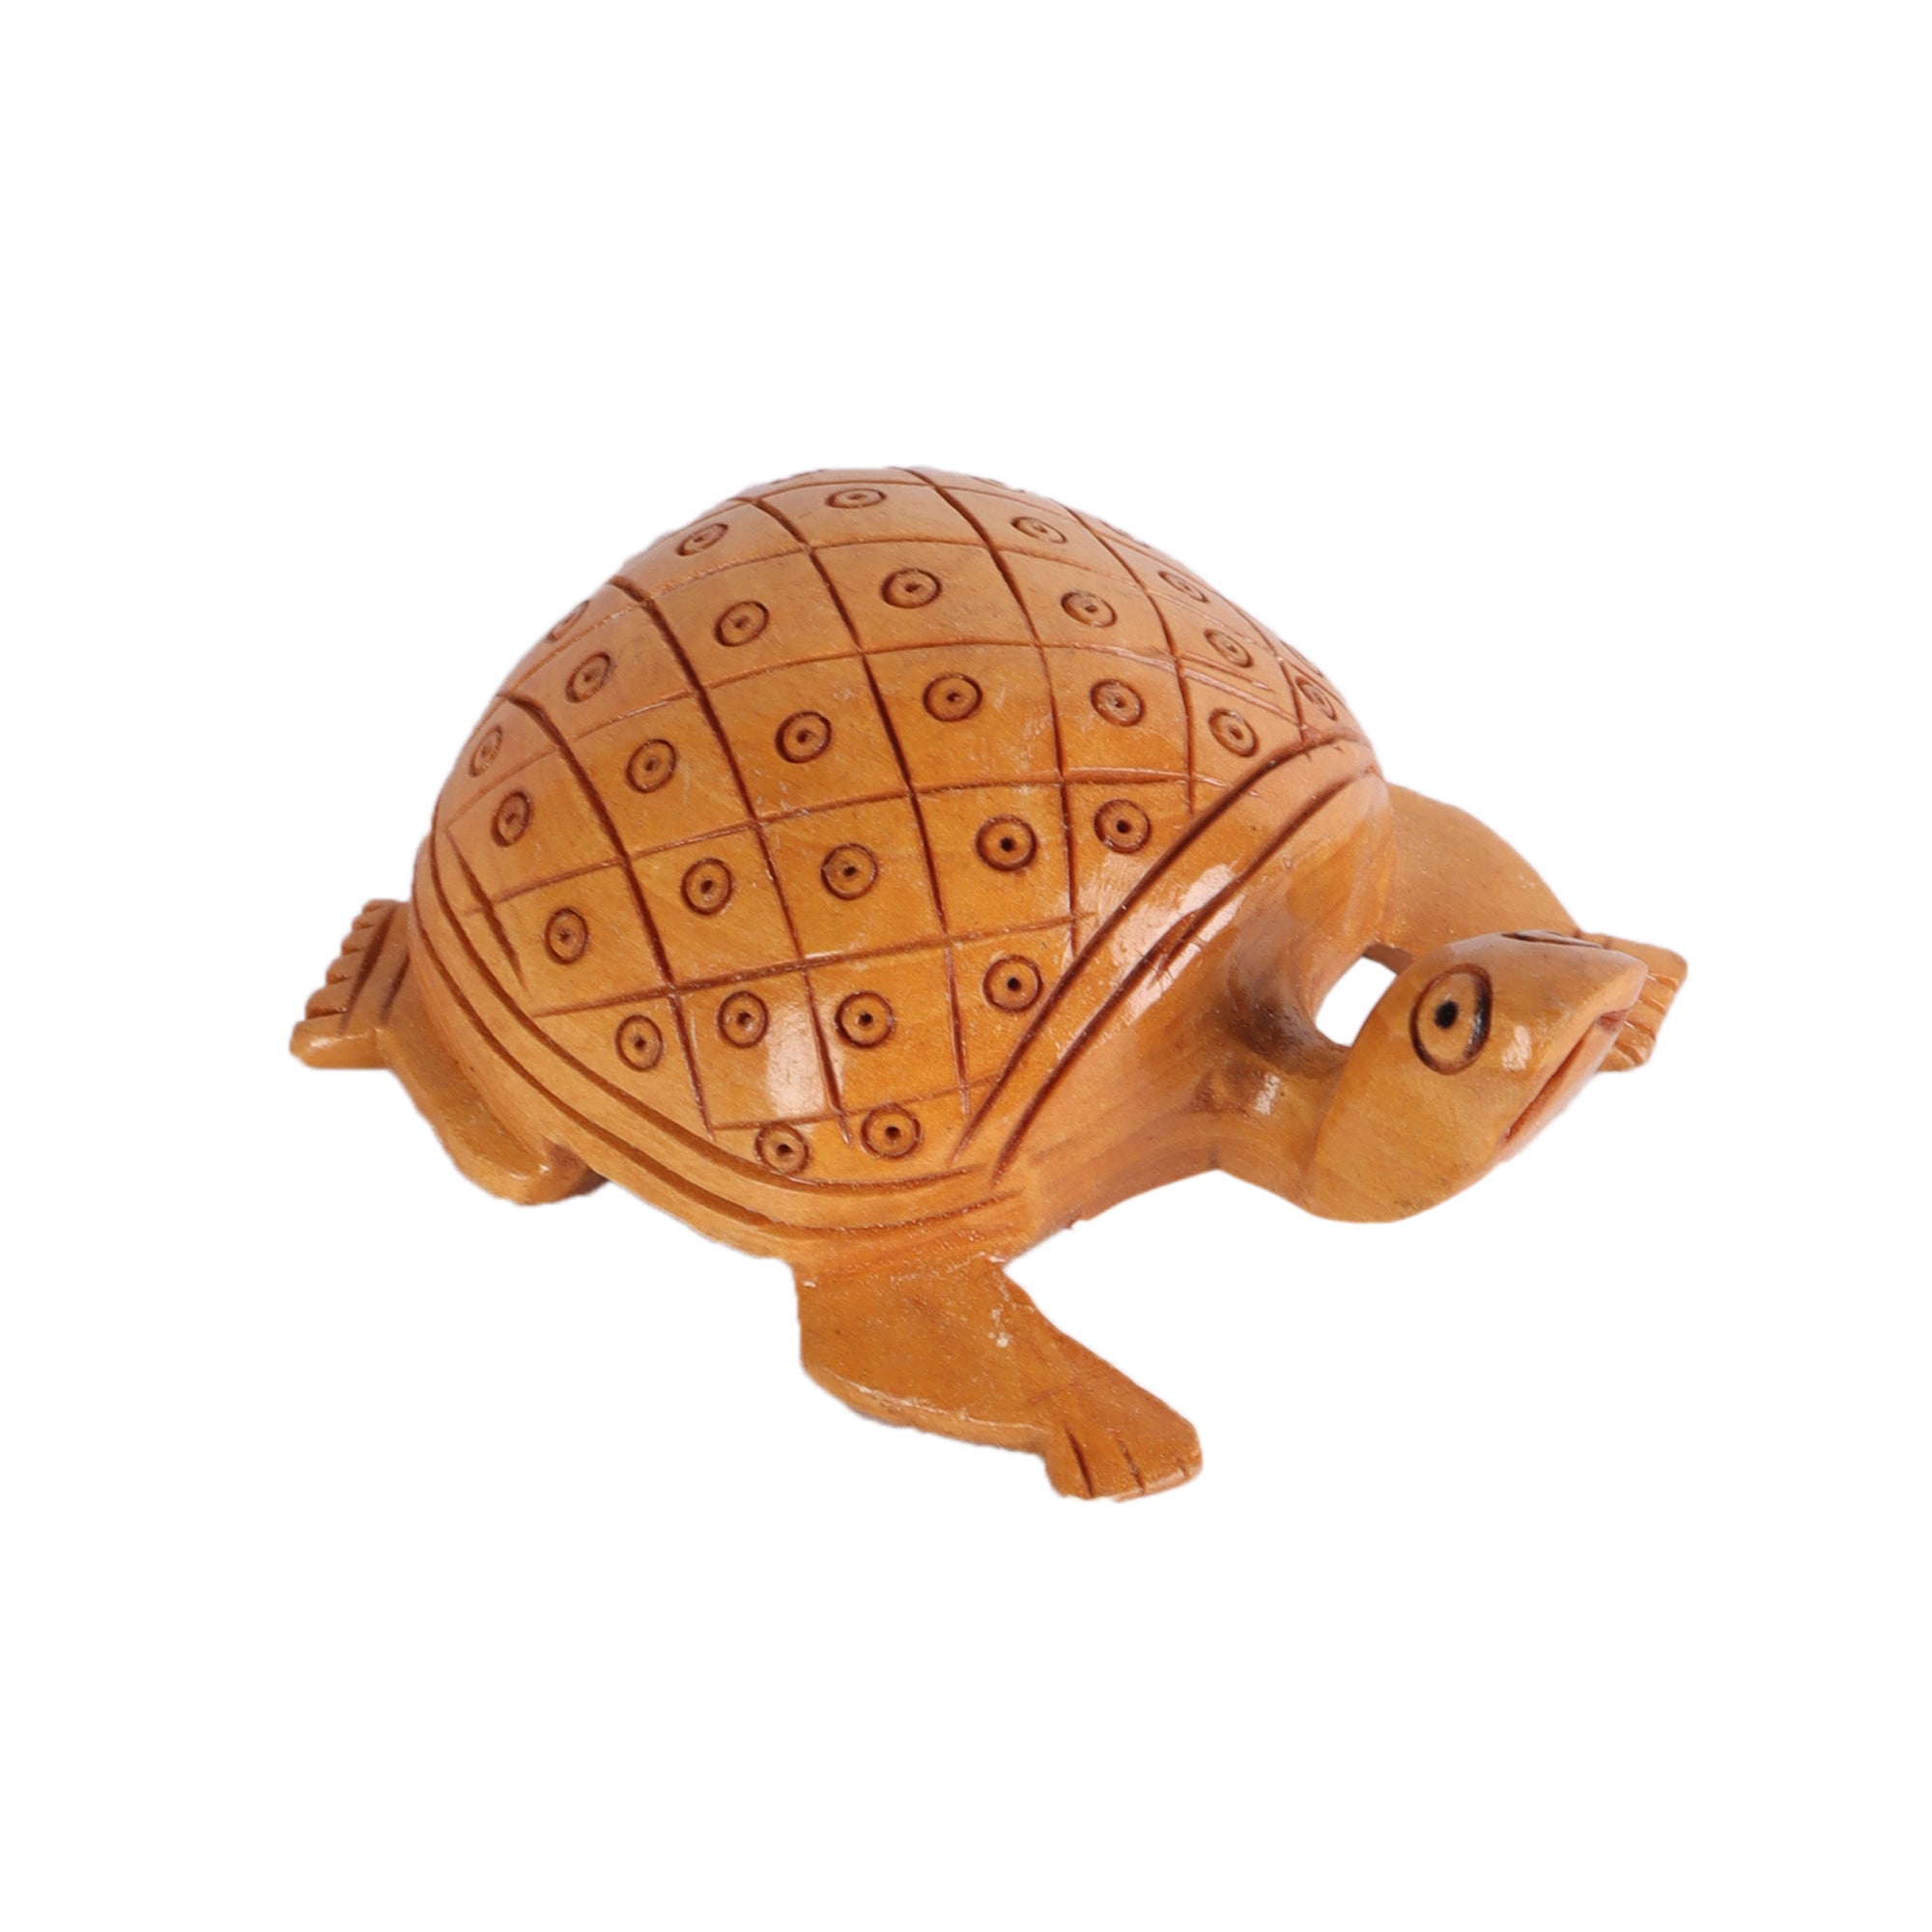 A Bale of Turtles (Set of 5)5